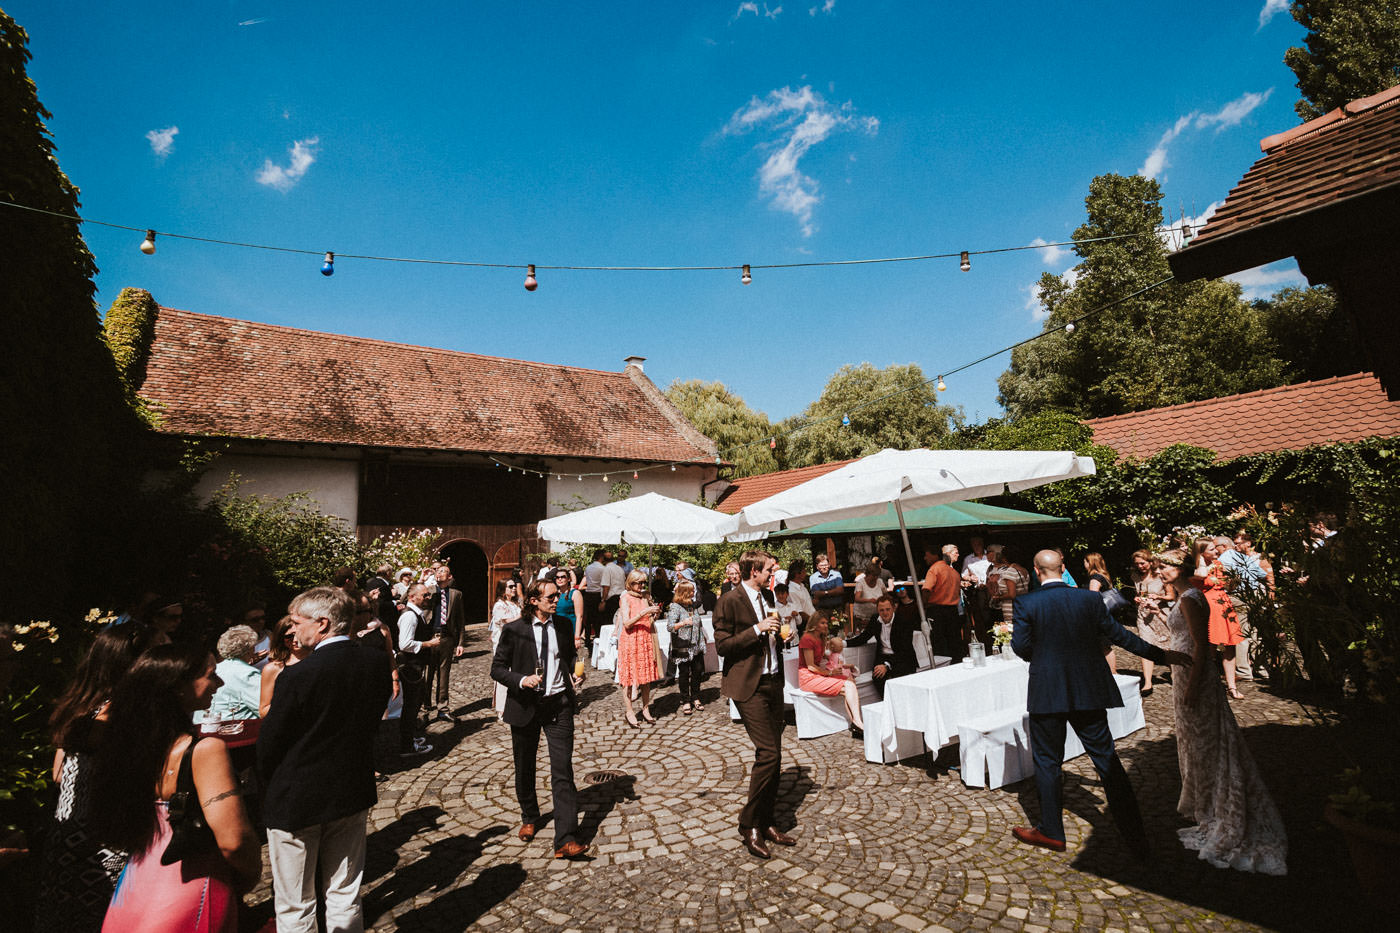 Relaxed atmosphere during a wedding reception in the courtyard of Weidenmühle winery